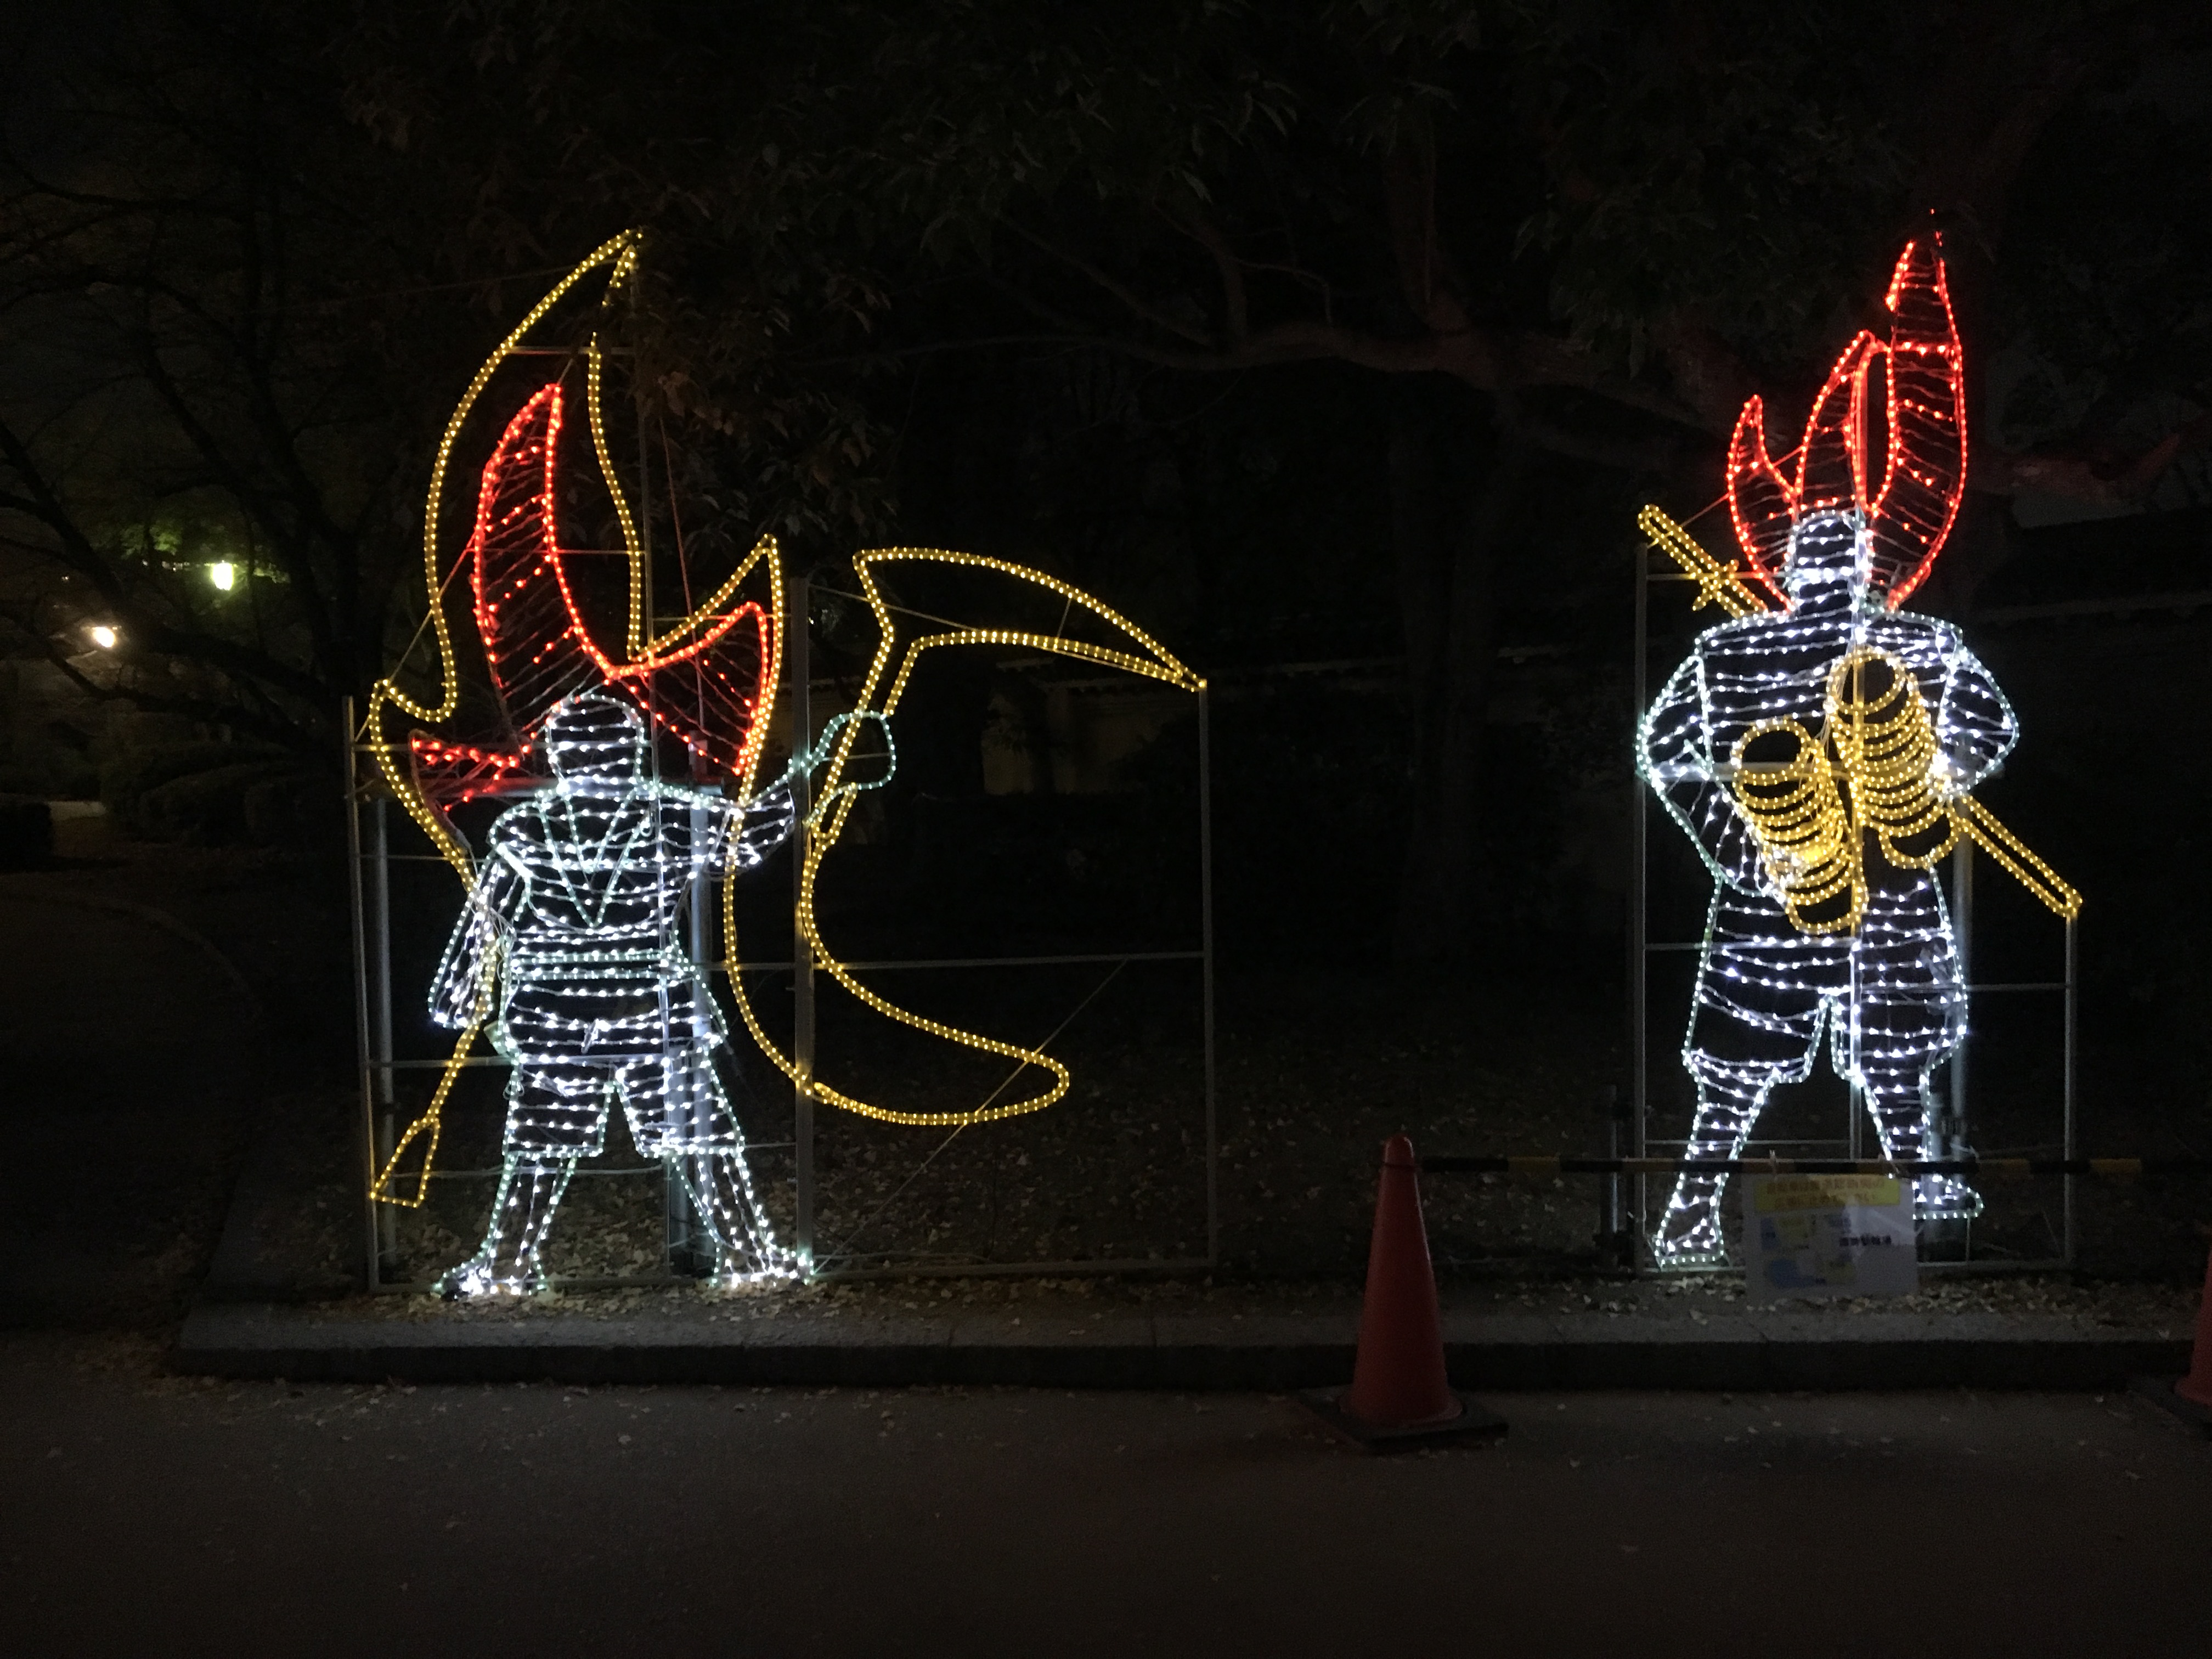 white and red illuminated figures in the night